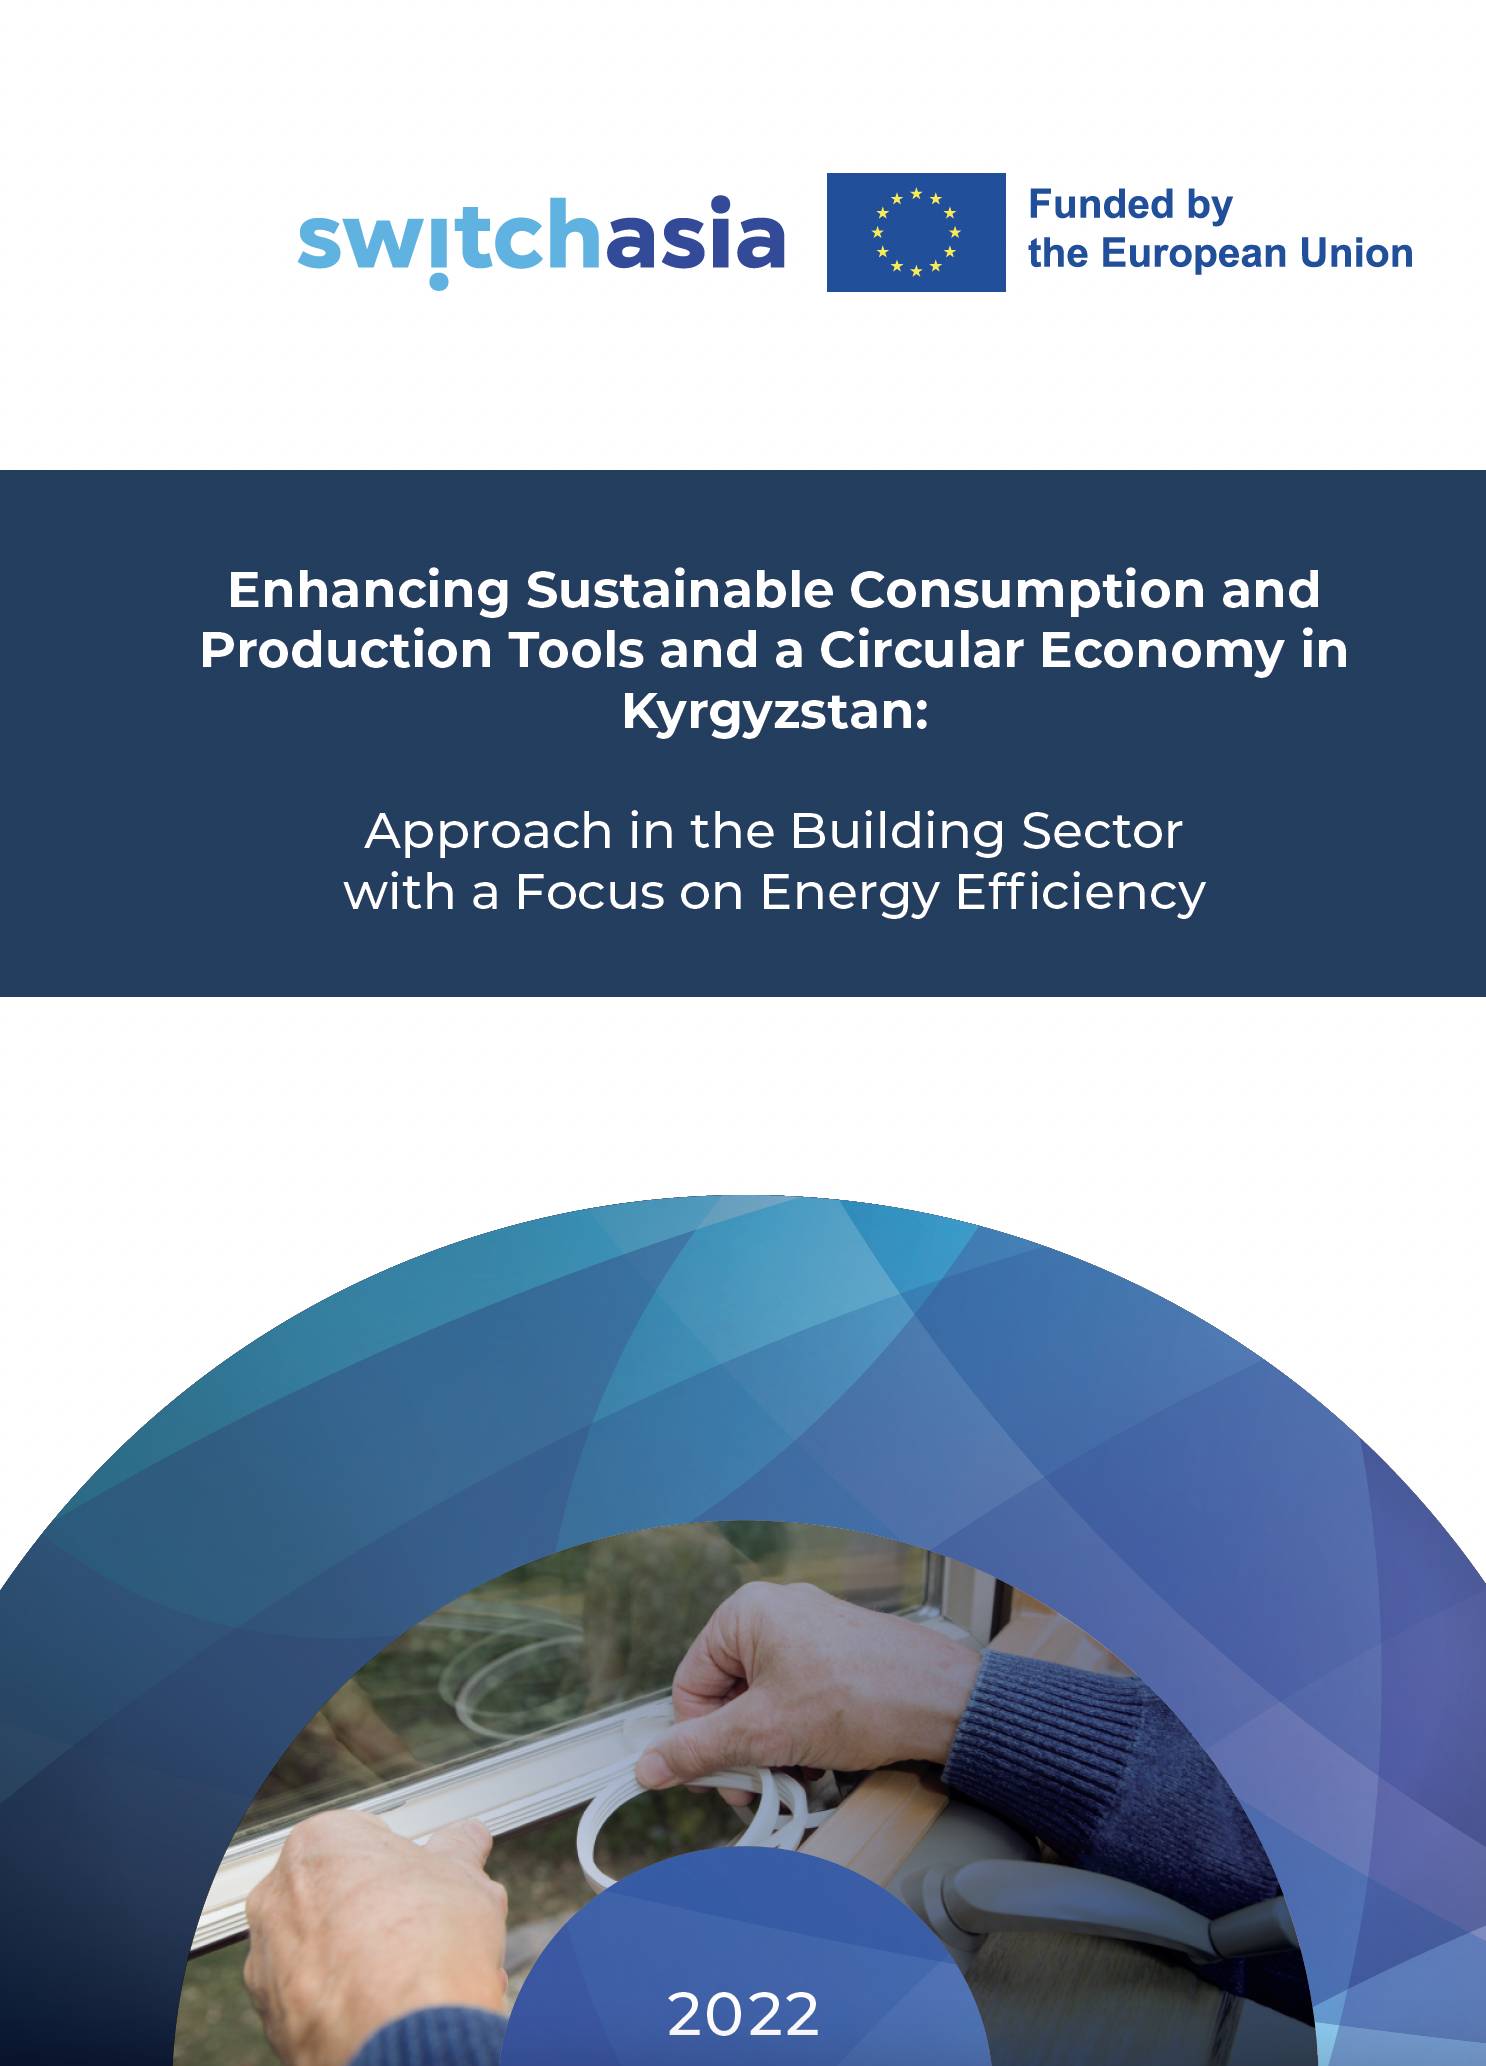 Enhancing Sustainable Consumption and Production Tools and a Circular Economy in Kyrgyzstan